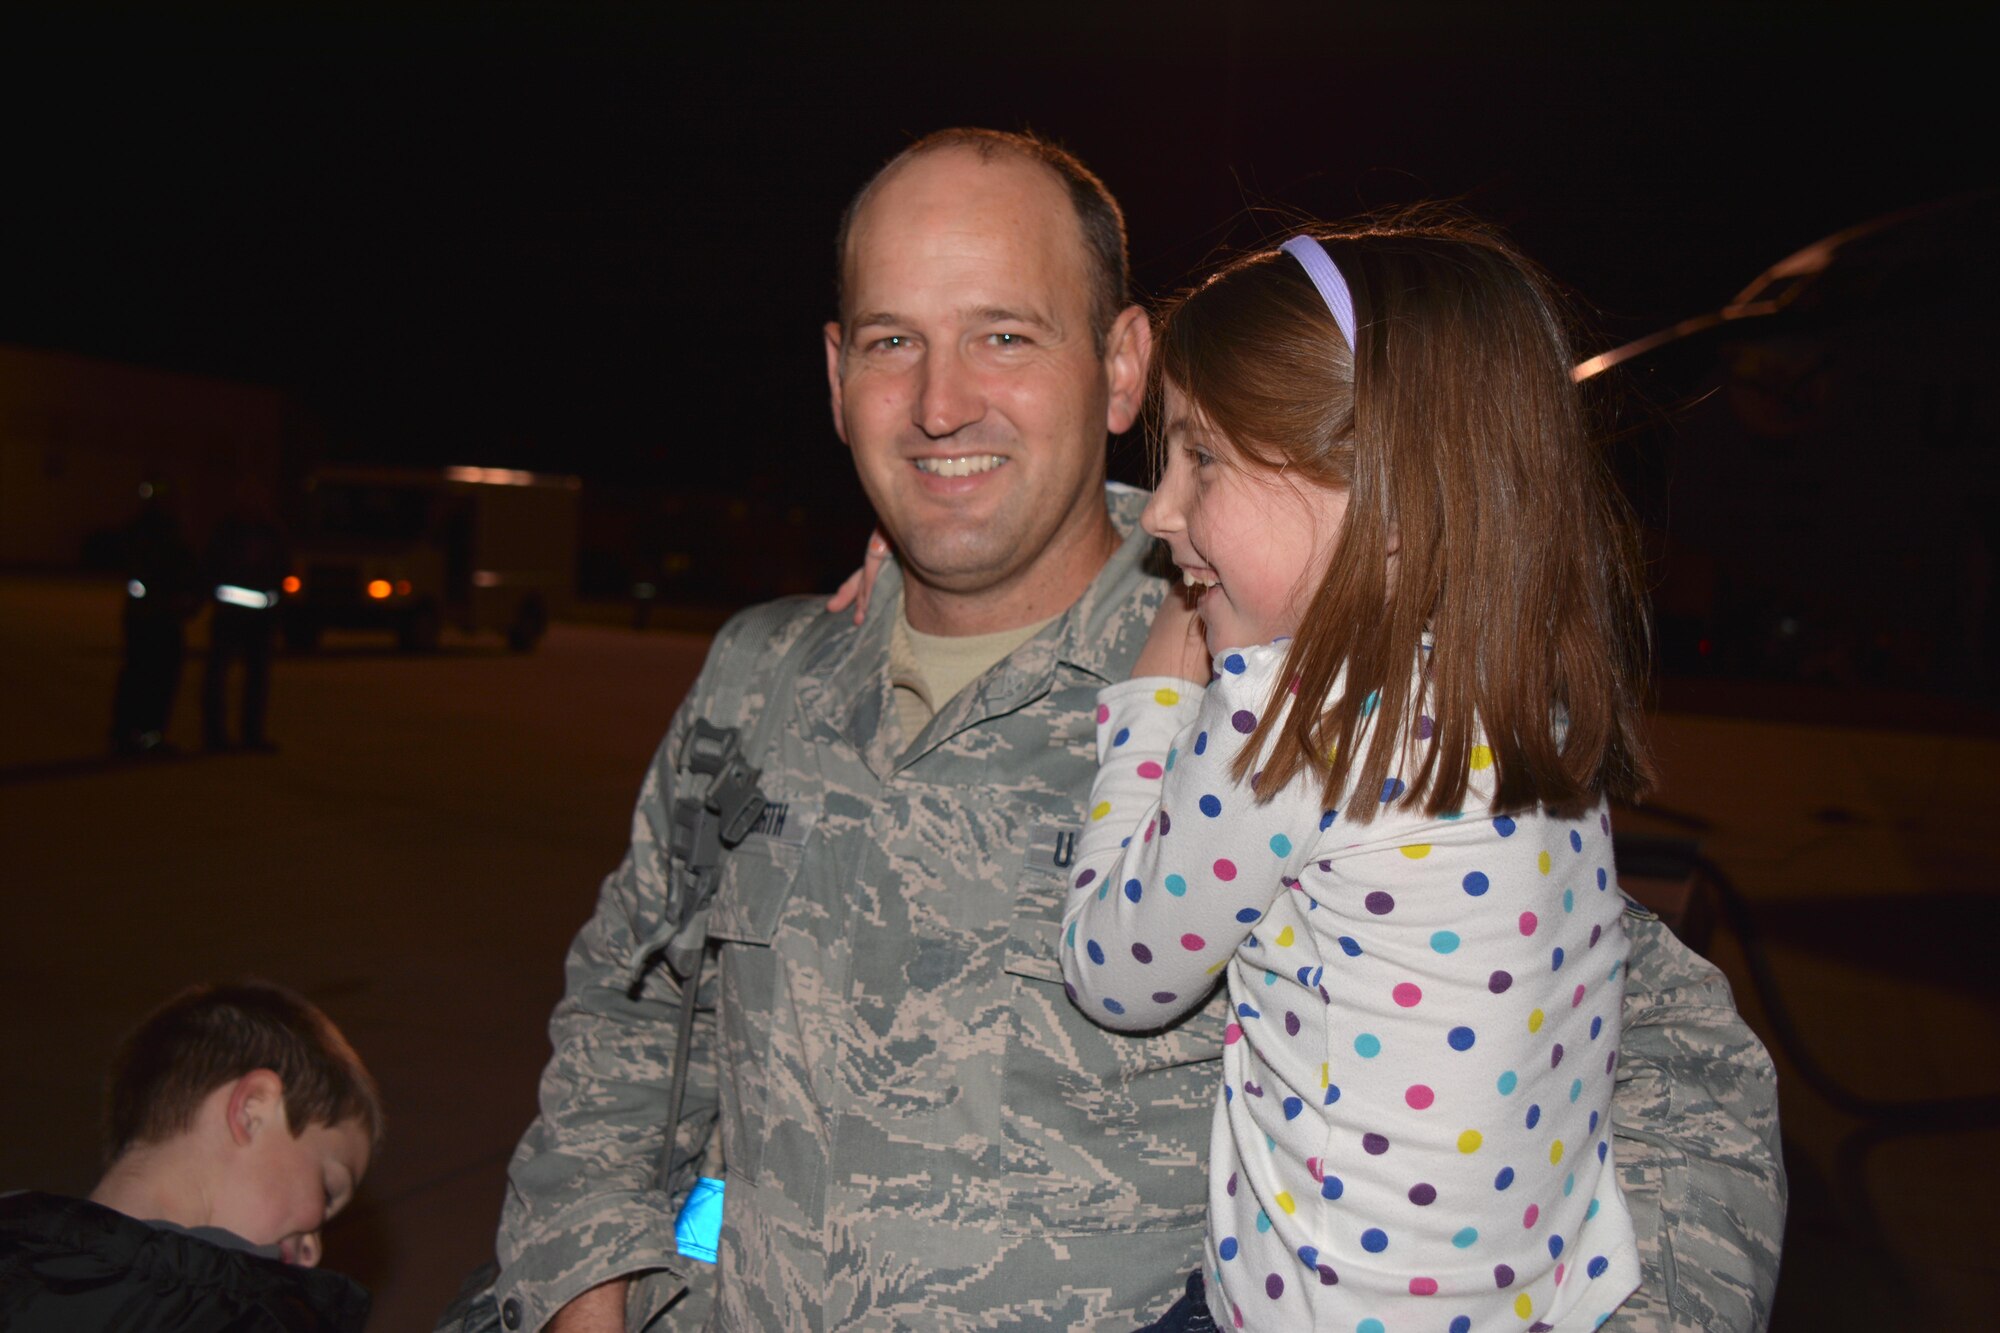 More than 30 members of the 507th Air Refueling Wing greet their families after returning from a four month deployment to Southwest Asia supporting refueling operations in the U.S. Central Commands area of responsibility. (U.S. Air Force Photo/Maj. Jon Quinlan)
